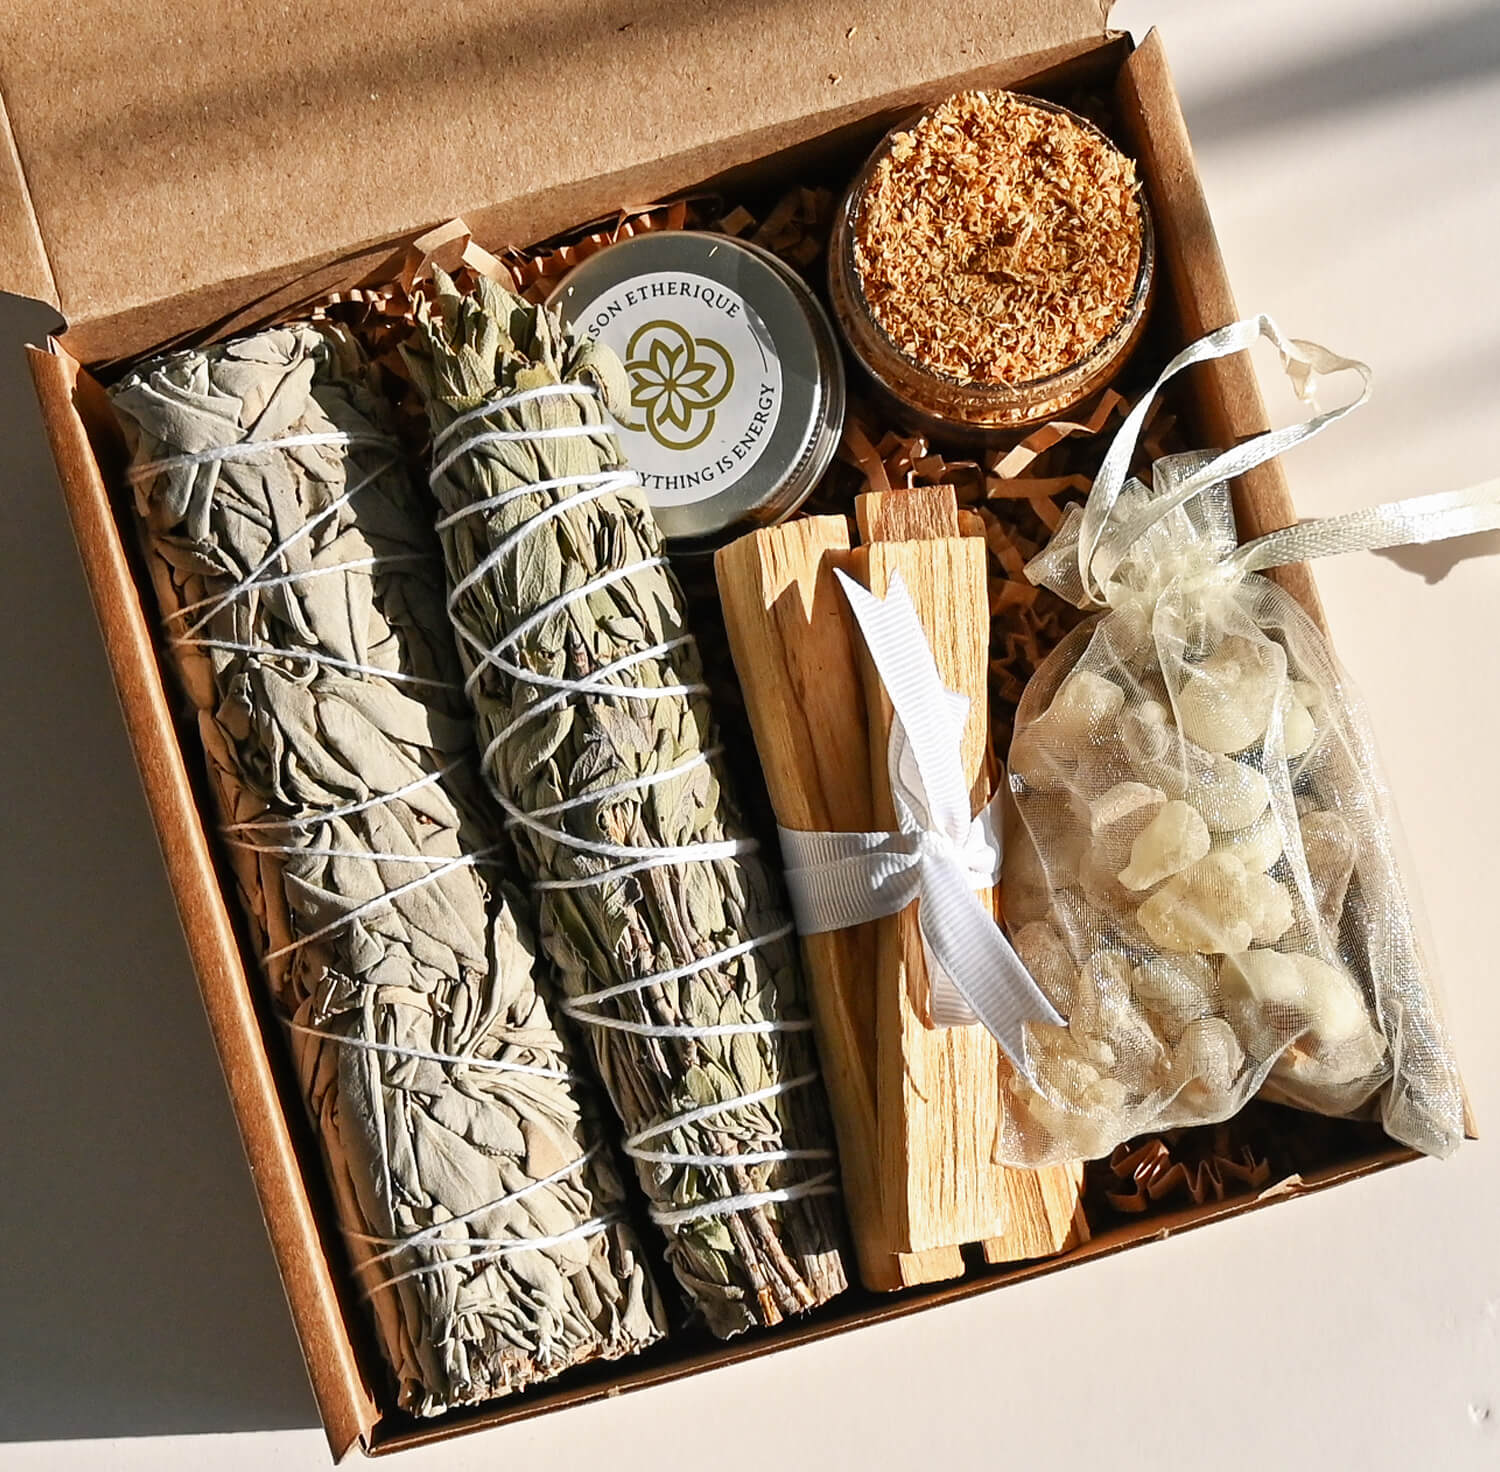 Ceremonial Incense Smudging Kit Product Guide